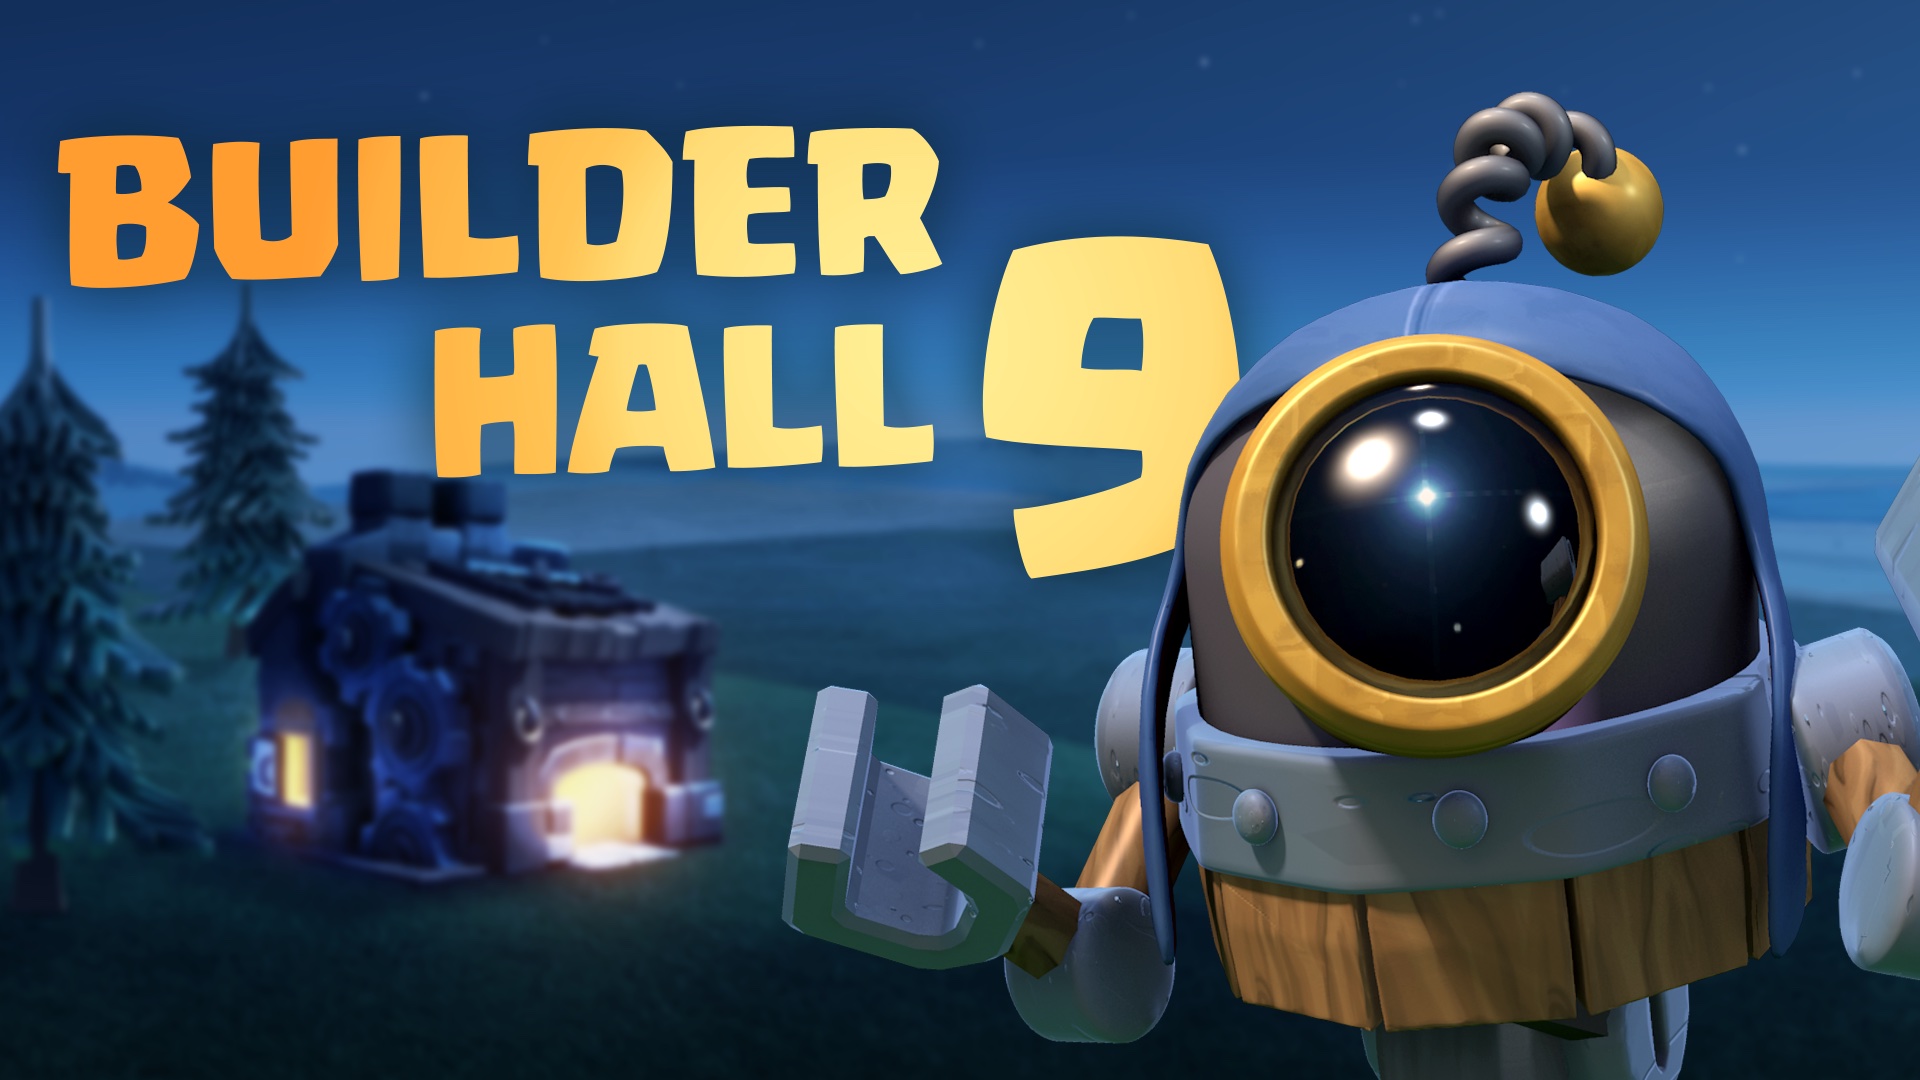 Clash of Clans June 2019 Update Guide: Builder Hall 9, Hog Glider, Lava Launcher, O.T.T.O Hut, Research Potion, Operation Blue Skies, and More